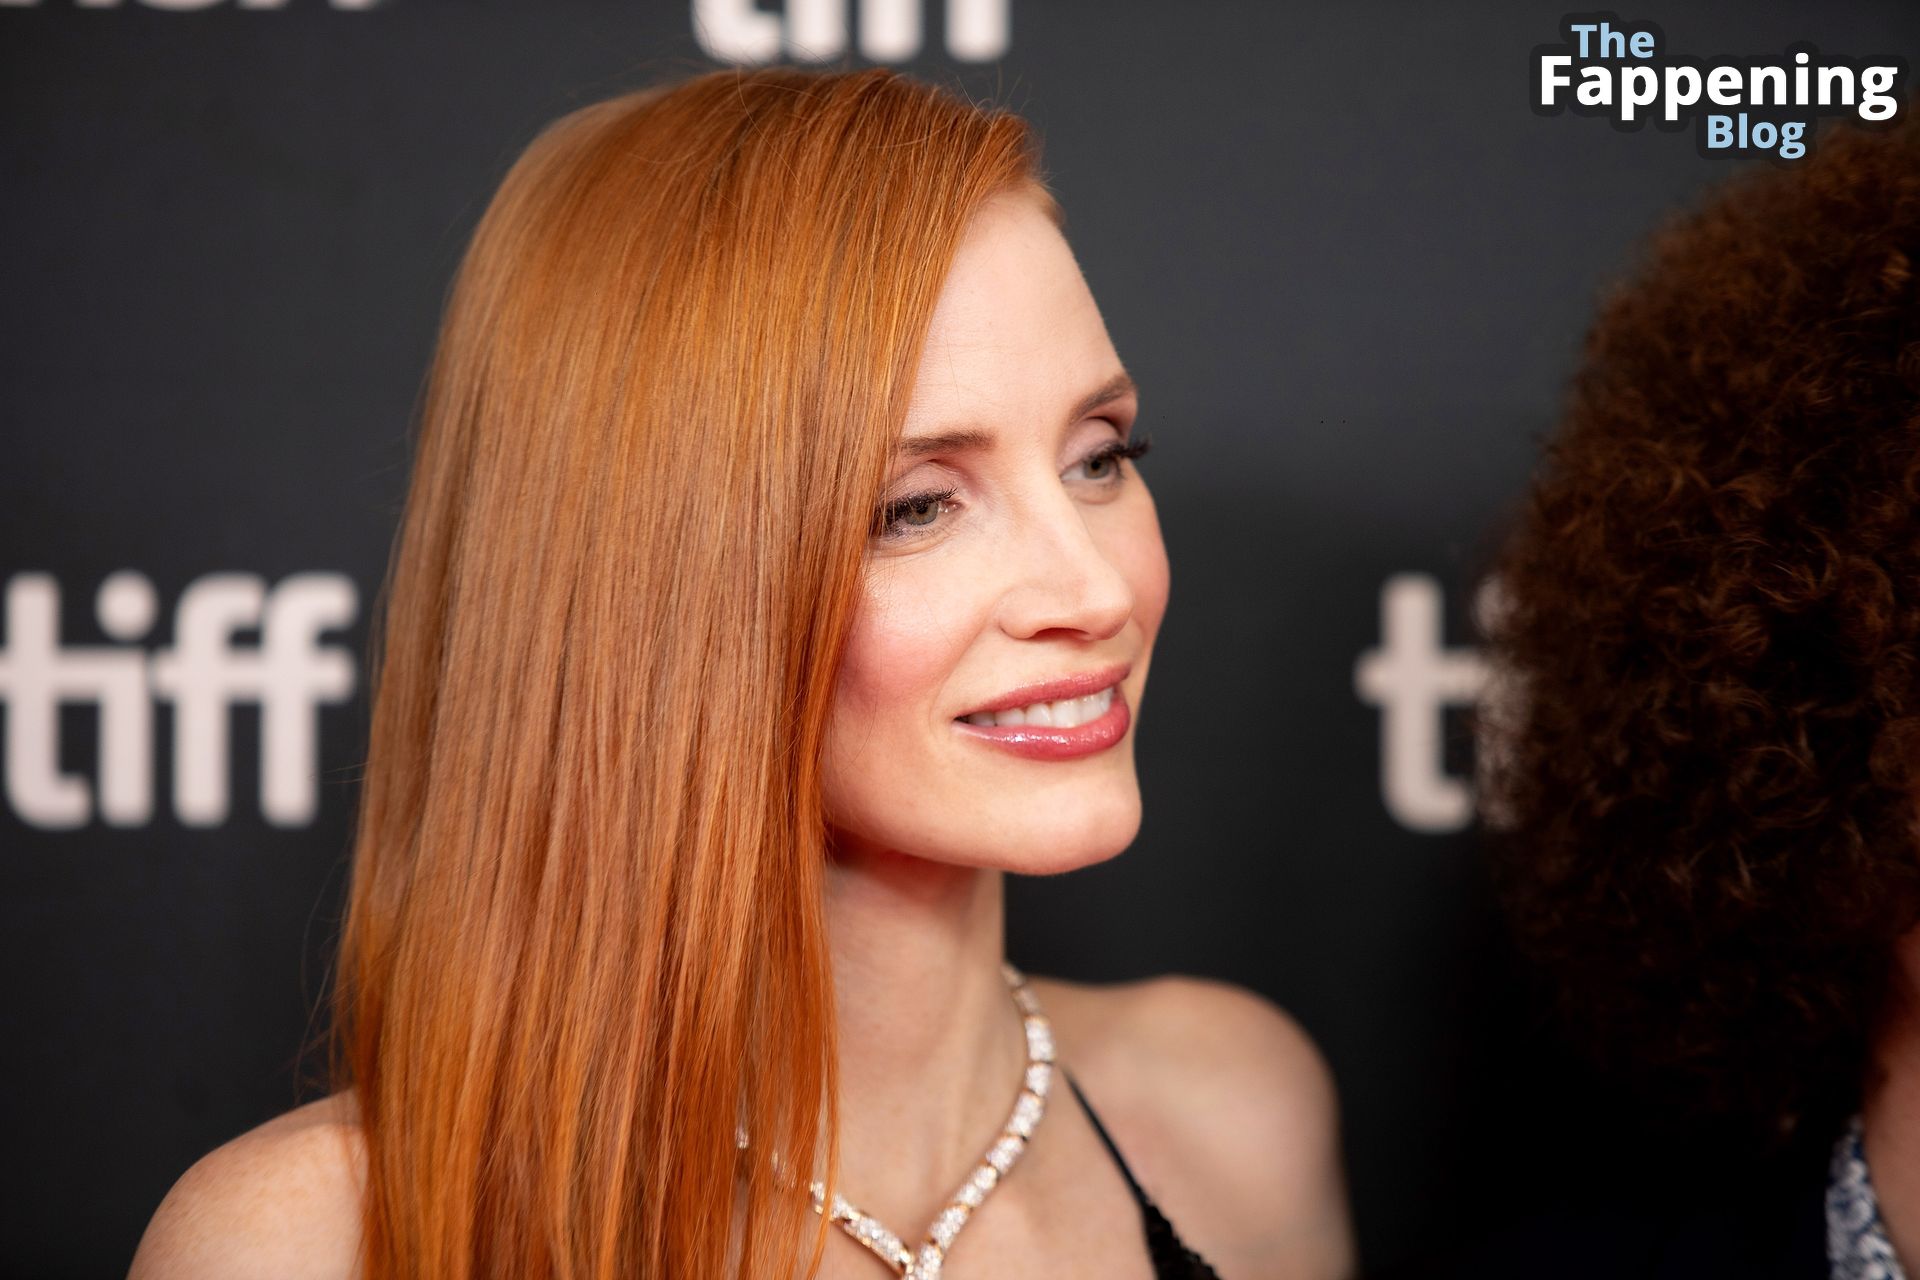 Jessica-Chastain-Sexy-50-The-Fappening-Blog.jpg